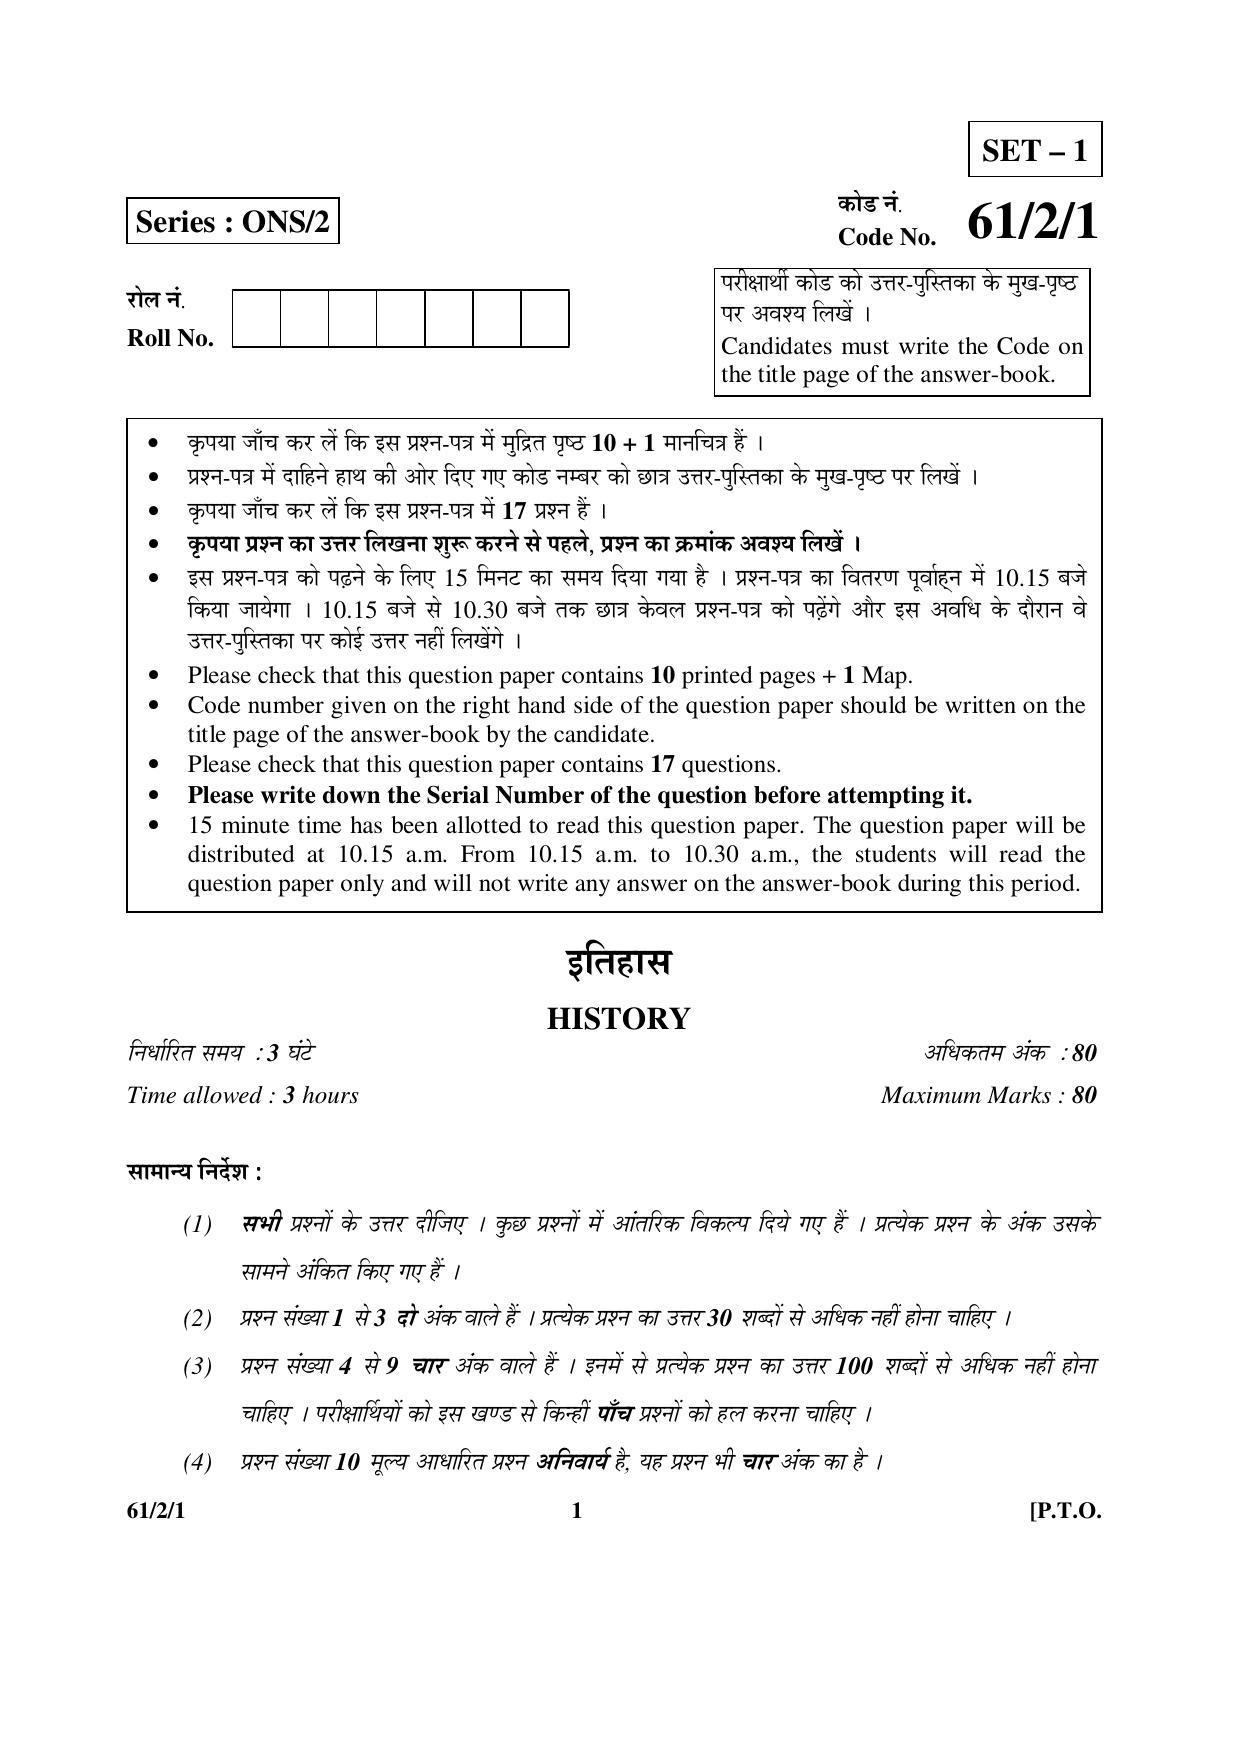 CBSE Class 12 61-2-1 History 2016 Question Paper - Page 1